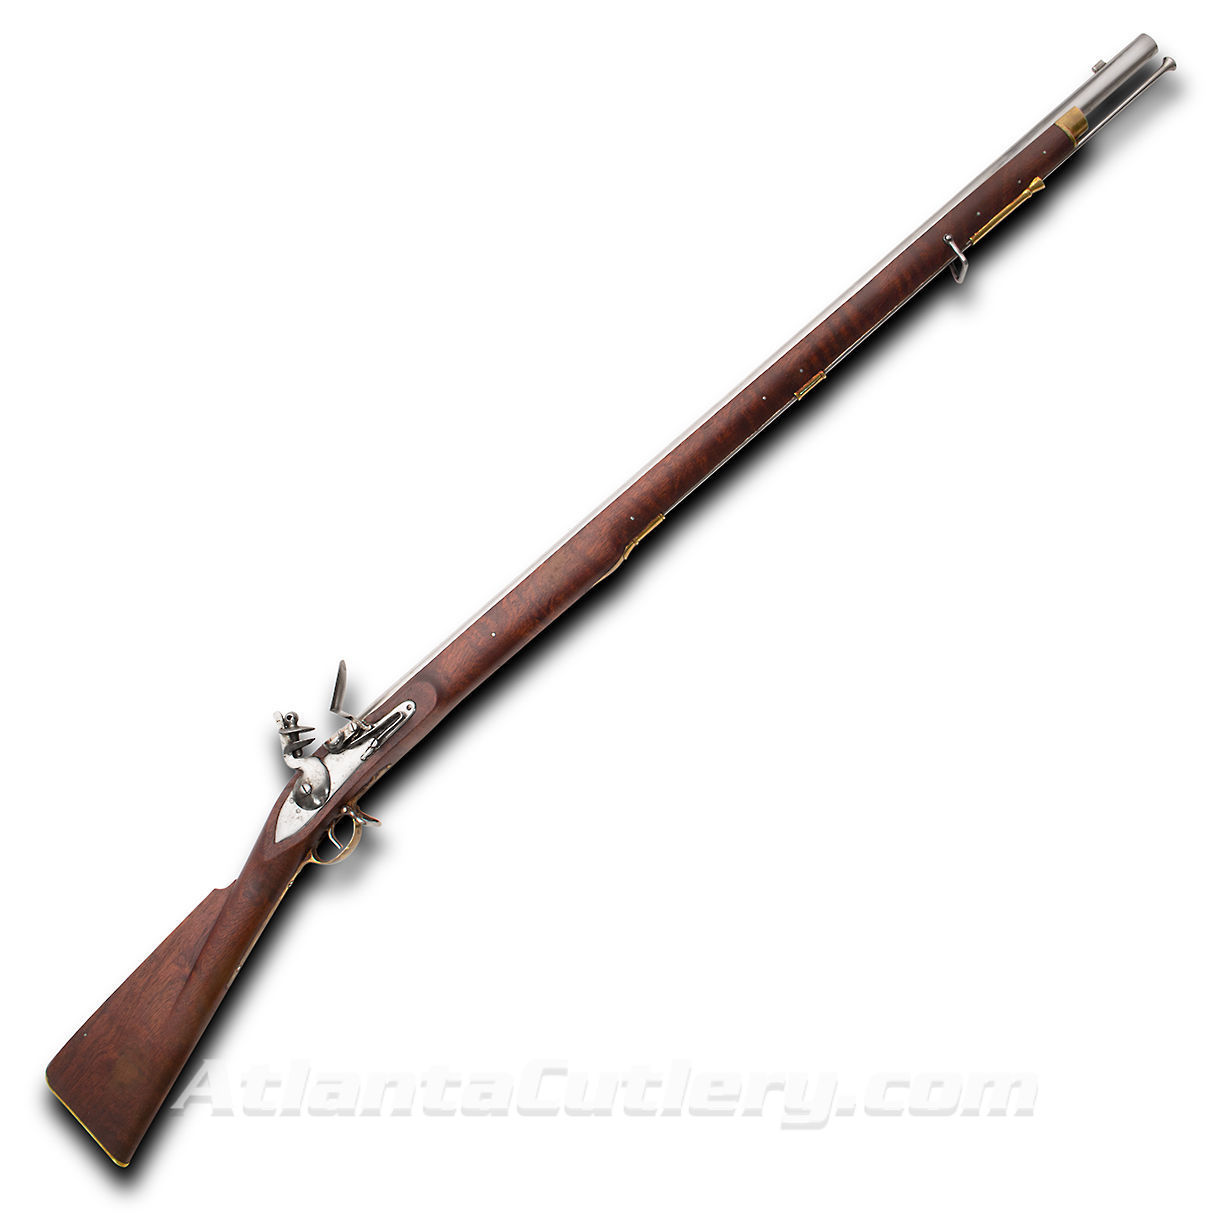 replica India Pattern Short Land Pattern Brown Bess Musket with swan neck cock, working trigger, lock and strike mechanism